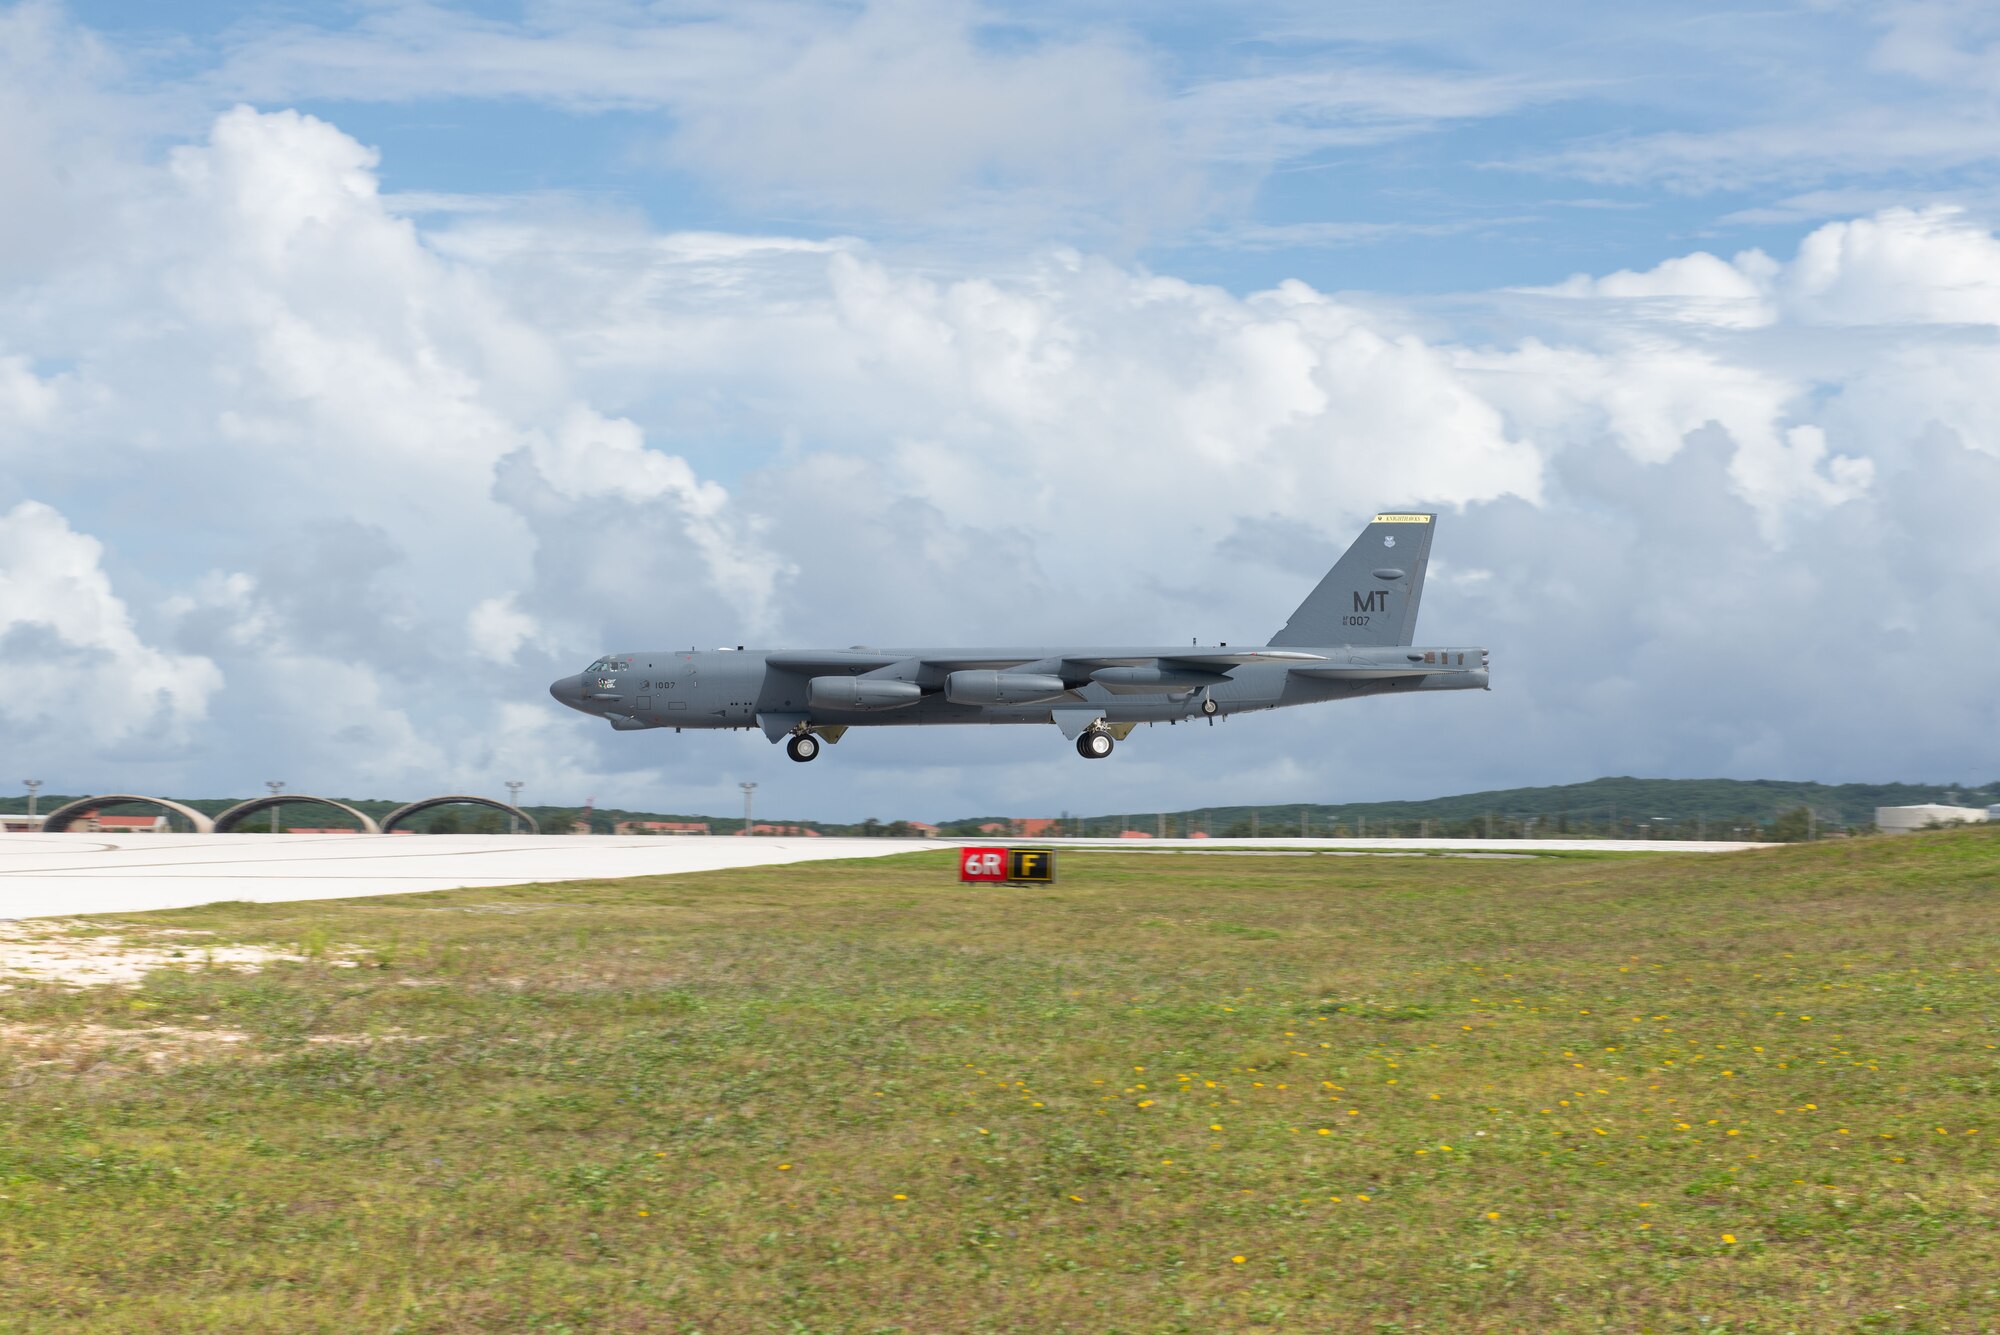 U.S. Air Force B-52H Stratofortress from the 5th Bomb Wing, Minot Air Force Base North Dakota, prepares to land at Andersen Air Force Base, Guam, for a Bomber Task Force deployment, July 15, 2021. Bomber Task Force missions demonstrate the strategic credibility and tactical flexibility of U.S. forces in today's security environment across the globe. (U.S. Air Force photo by SSgt Nicholas Crisp)